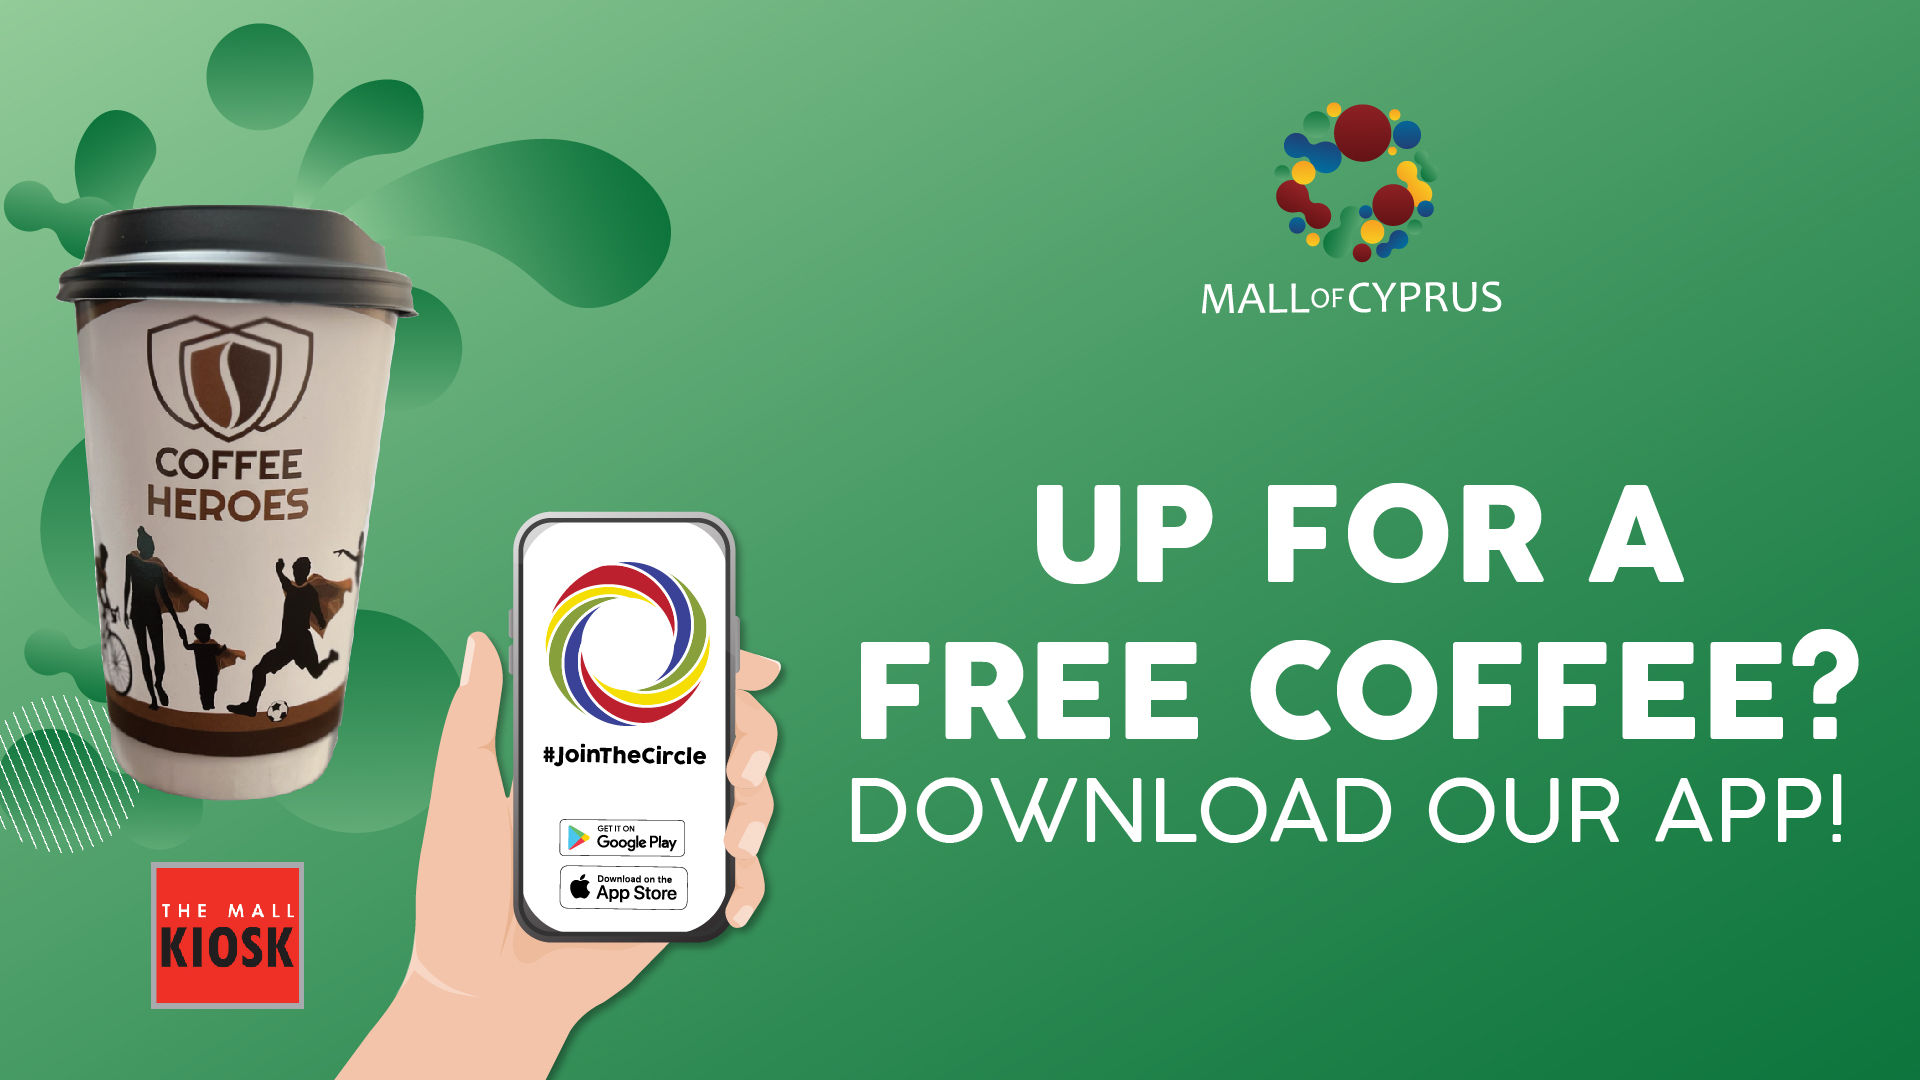 Free Coffee Heroes coffee from The Mall Kiosk by downloading the Circle App